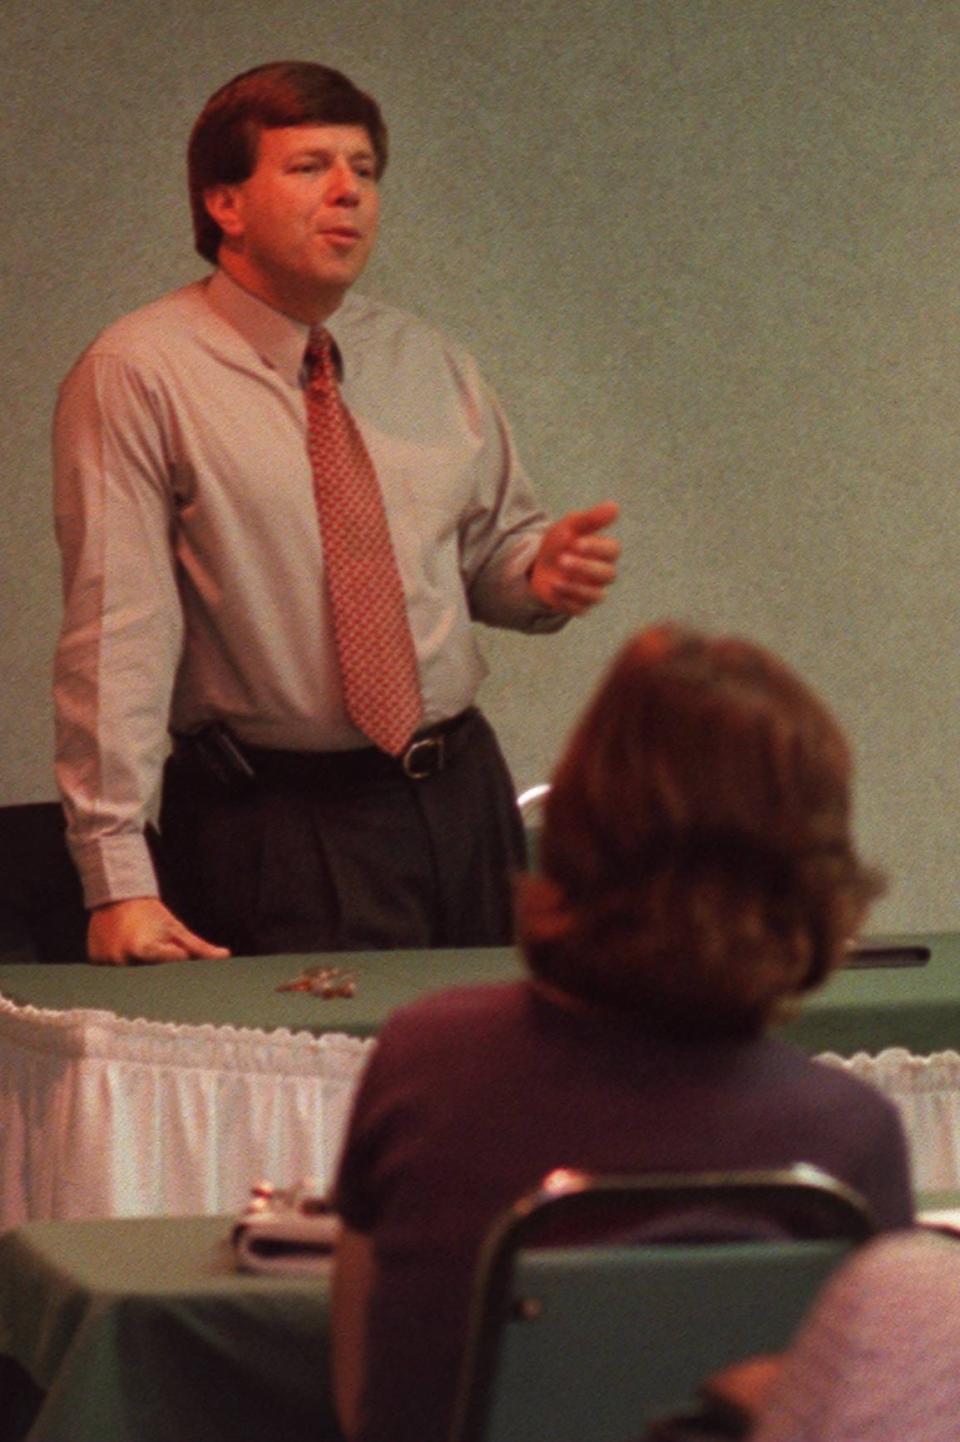 Former editor of the Florida Alligator Ron Sachs, addresses the audience at The Alligator's 90th Anniversary Celebration Seminar in 1996. at this time Sachs was the press secretary for Florida Gov. Lawton Chiles.